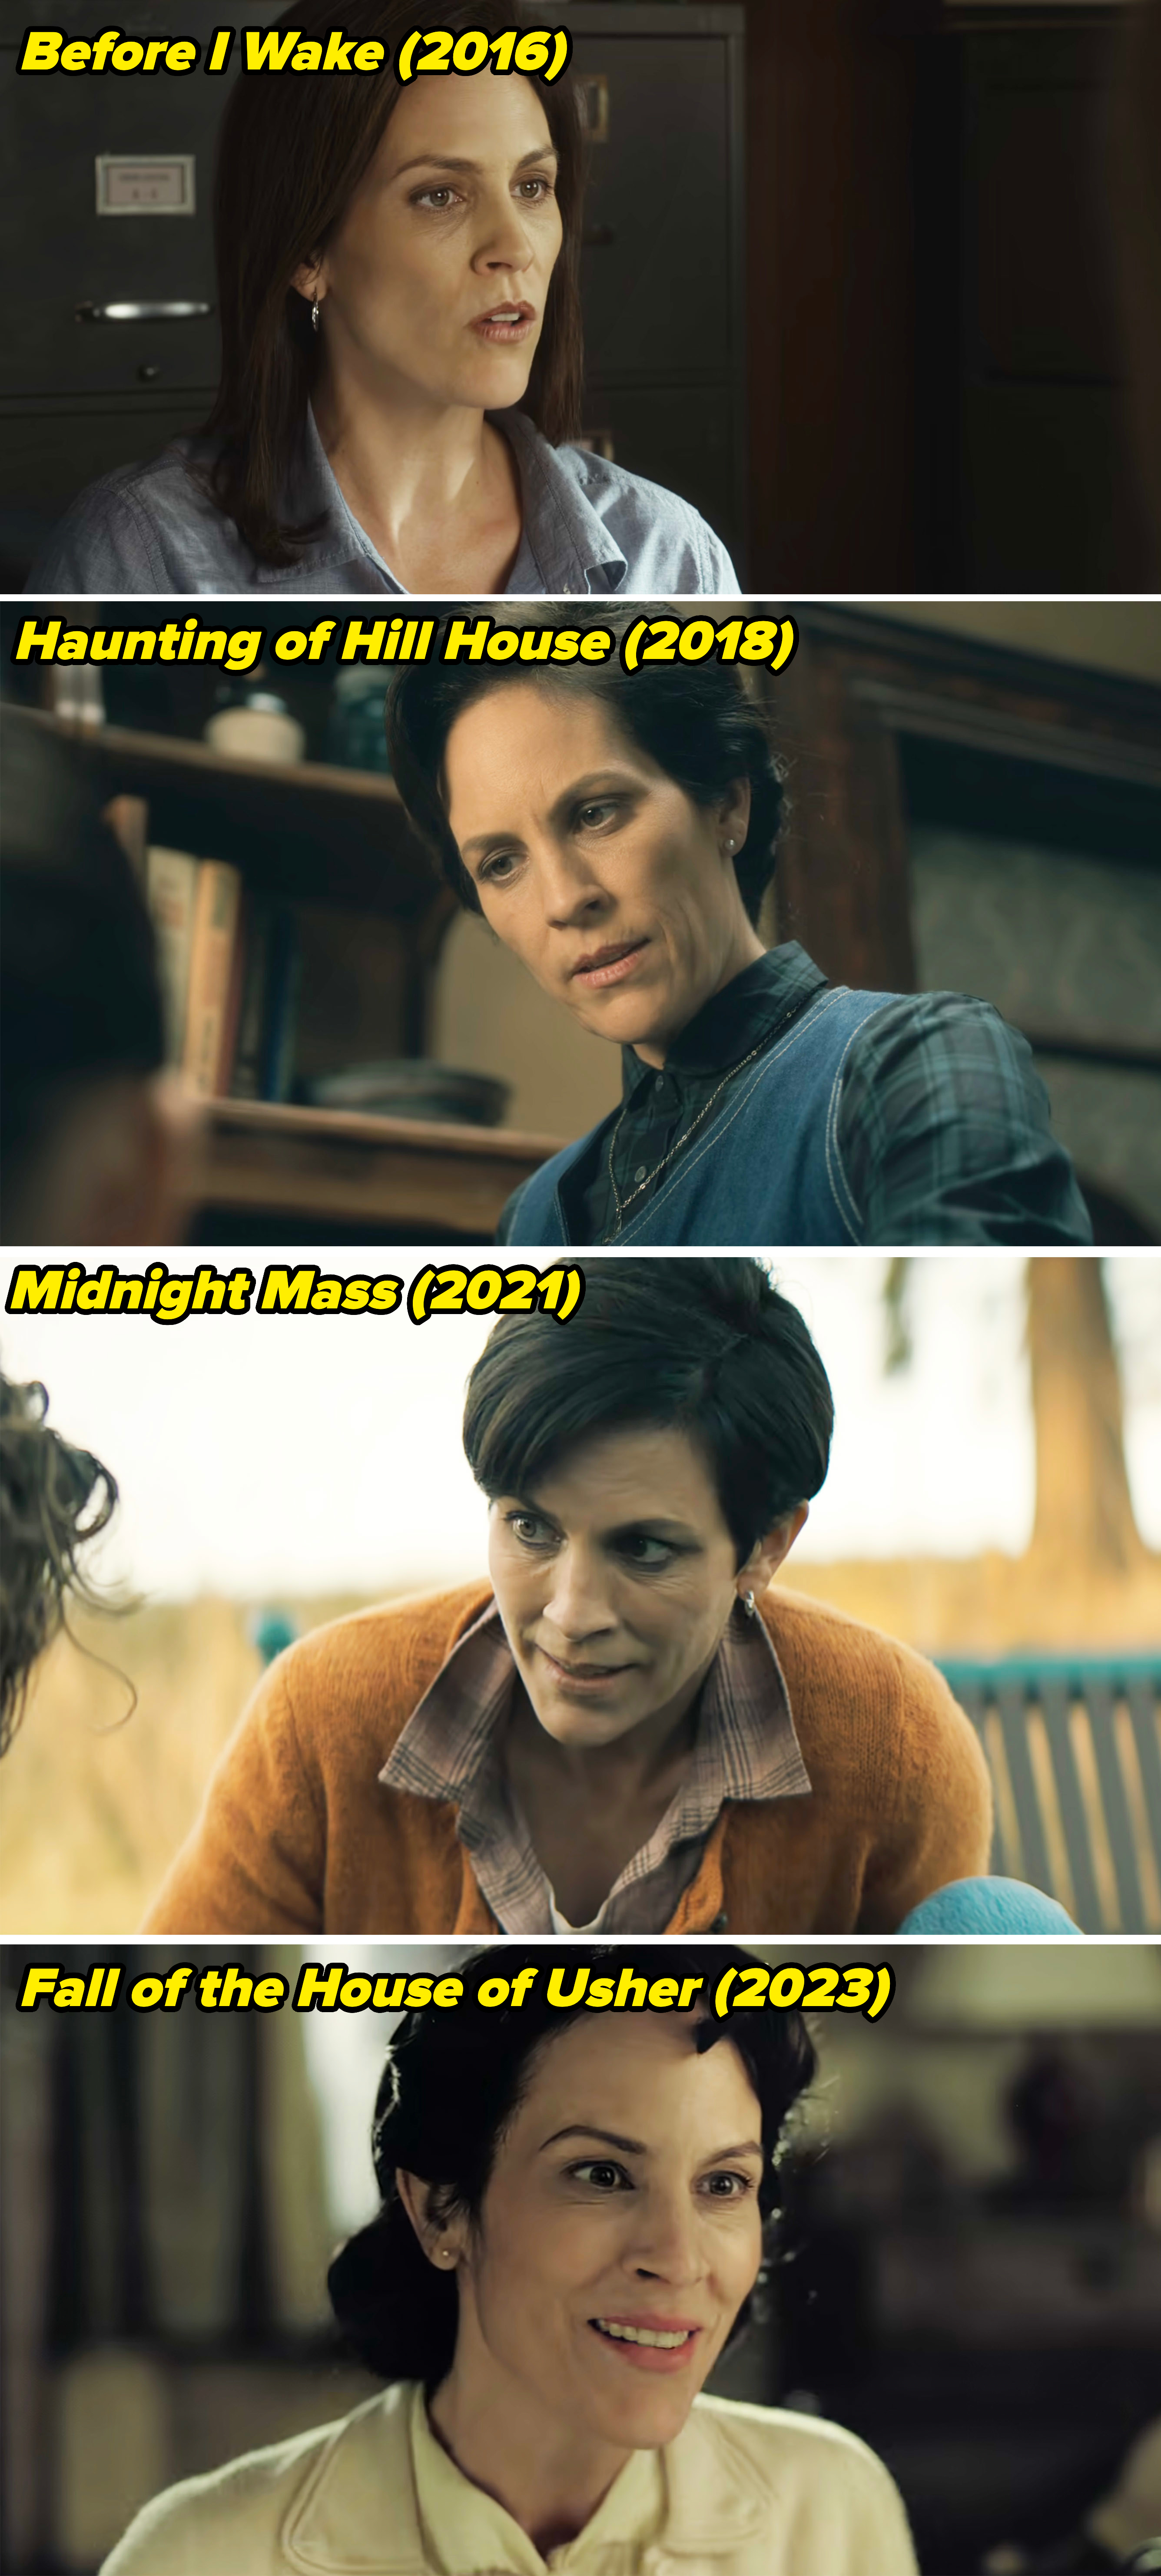 Annabeth Gish in multiple projects